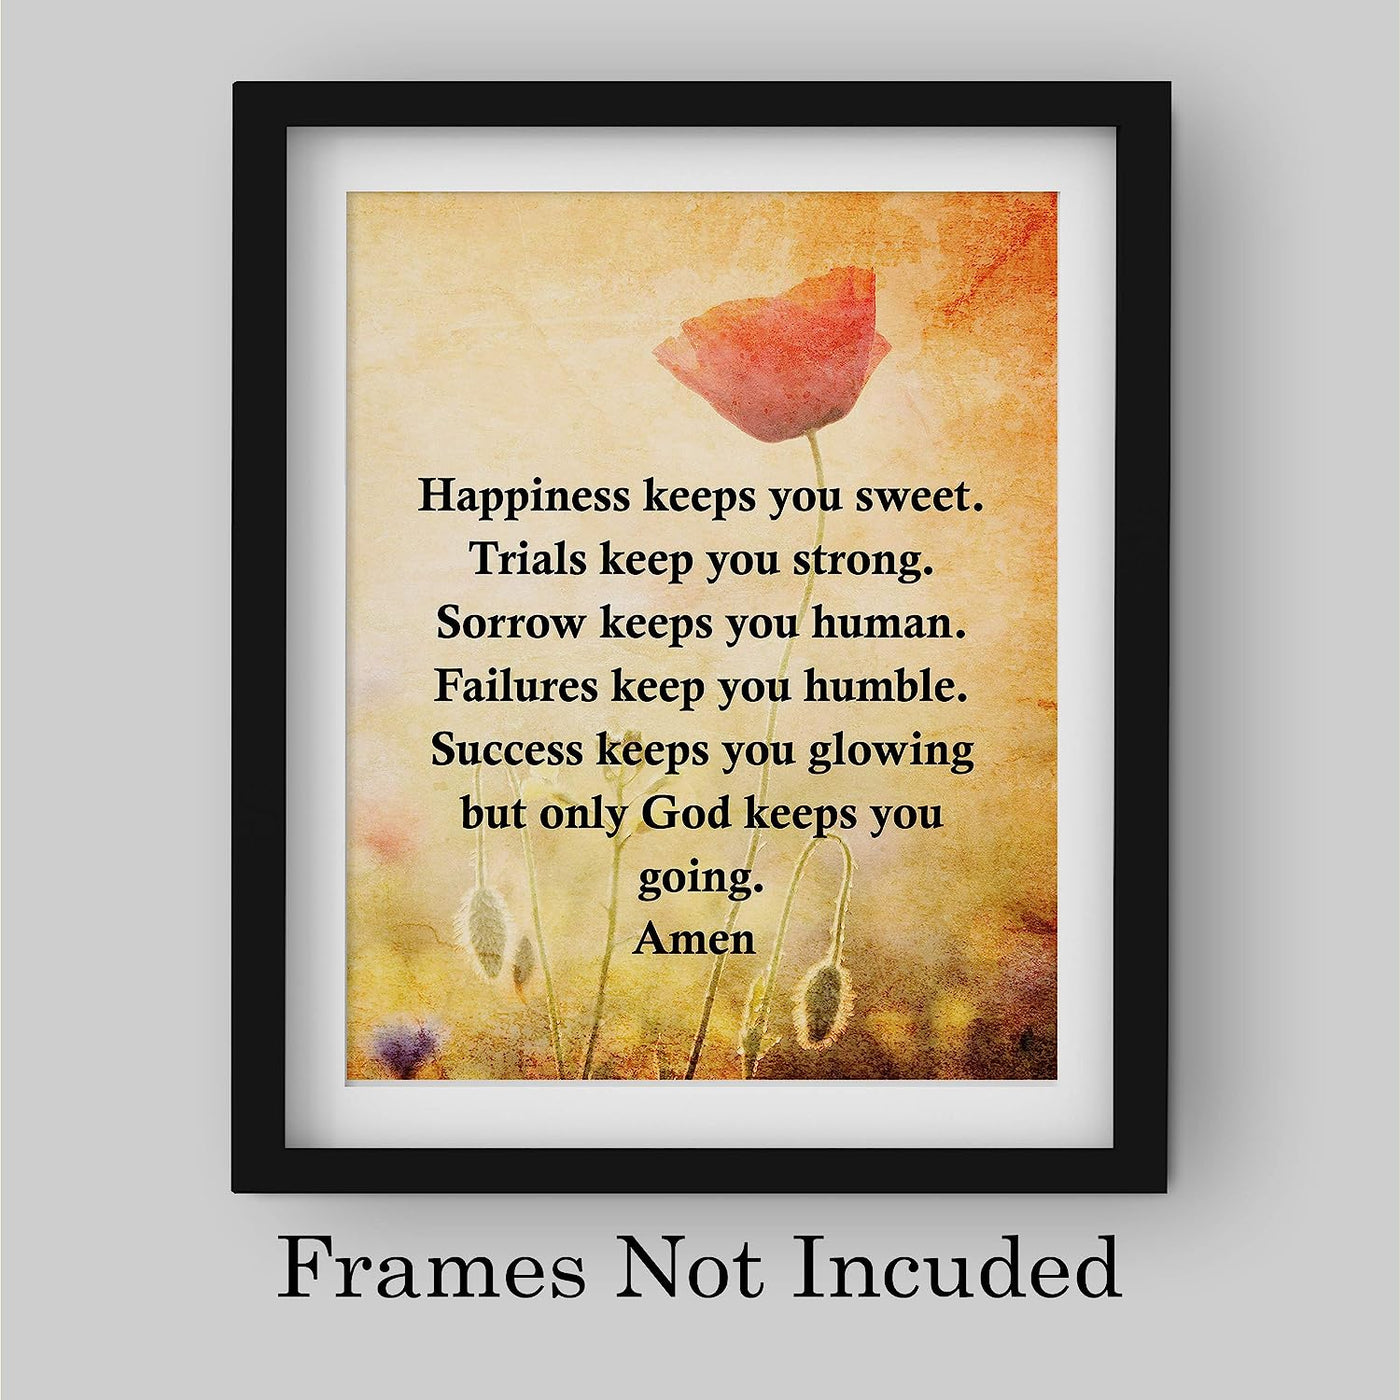 Happiness Keeps You Sweet-Only God Keeps You Going Inspirational Quotes Wall Art -8 x 10" Floral Christian Print-Ready to Frame. Home-Office-Sunday School-Church Decor. Great Gift of Faith!